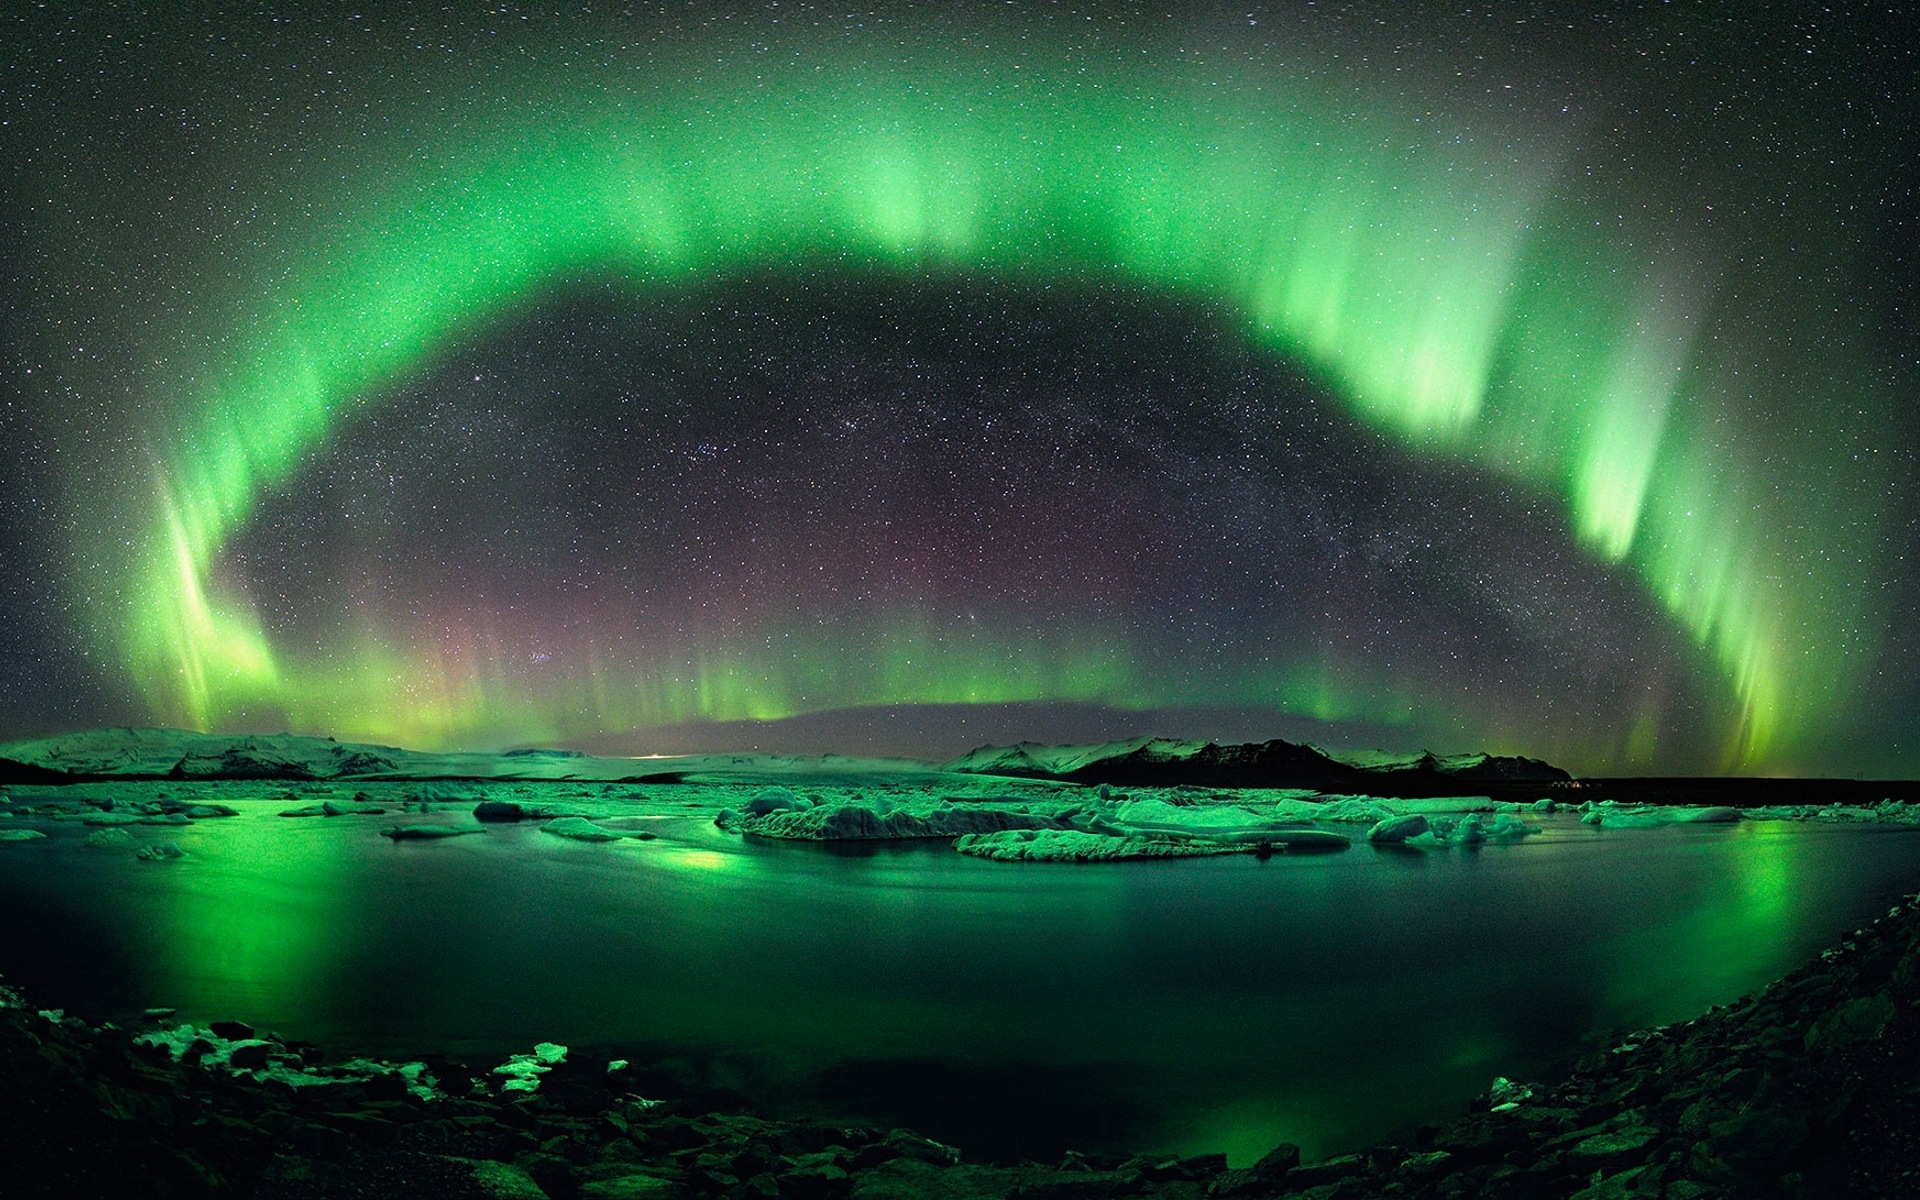 Natural wonders of the Northern Lights HD Wallpaper (2) #10 - 1920x1200